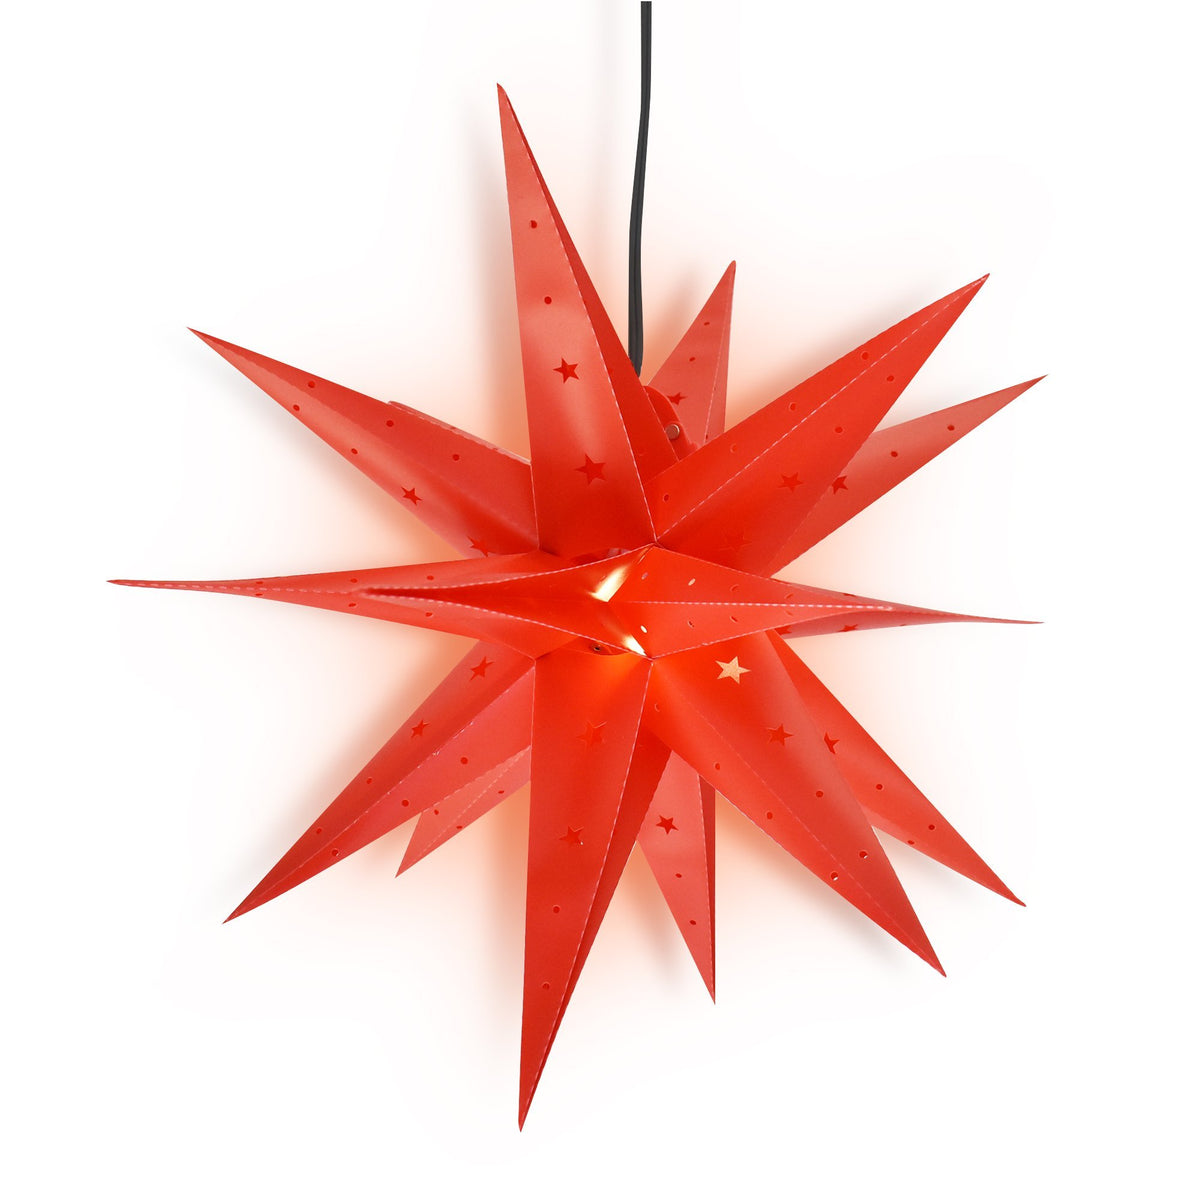 23" Red Moravian Weatherproof Star Lantern Lamp, Multi-Point Hanging Decoration (Shade Only)